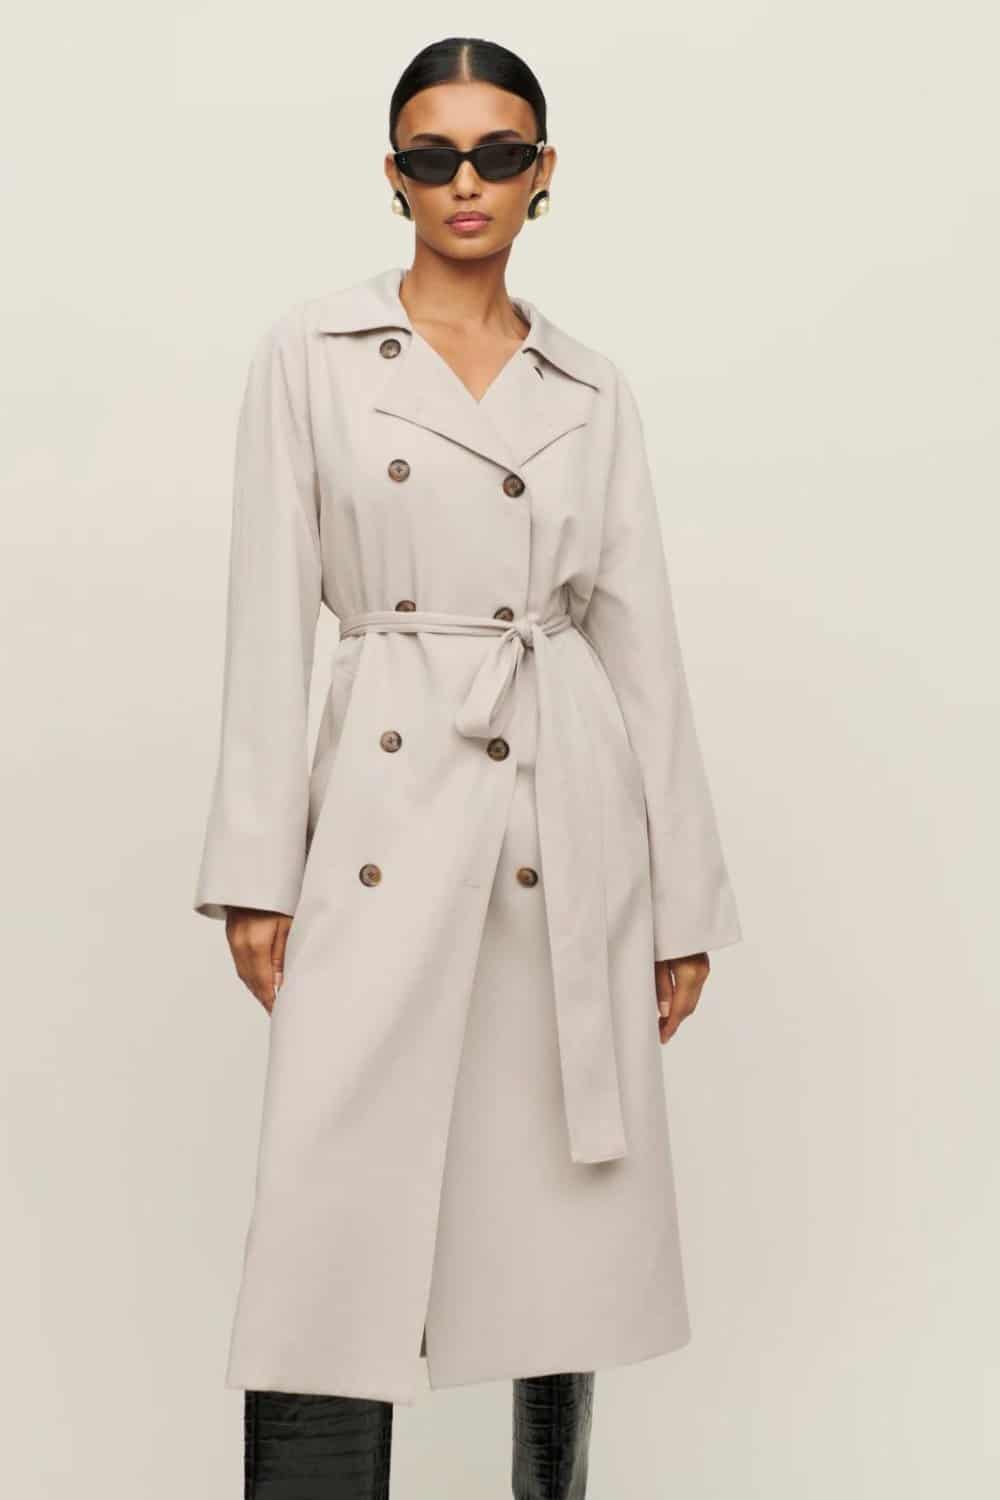 Reformation Cotton Trench Coat